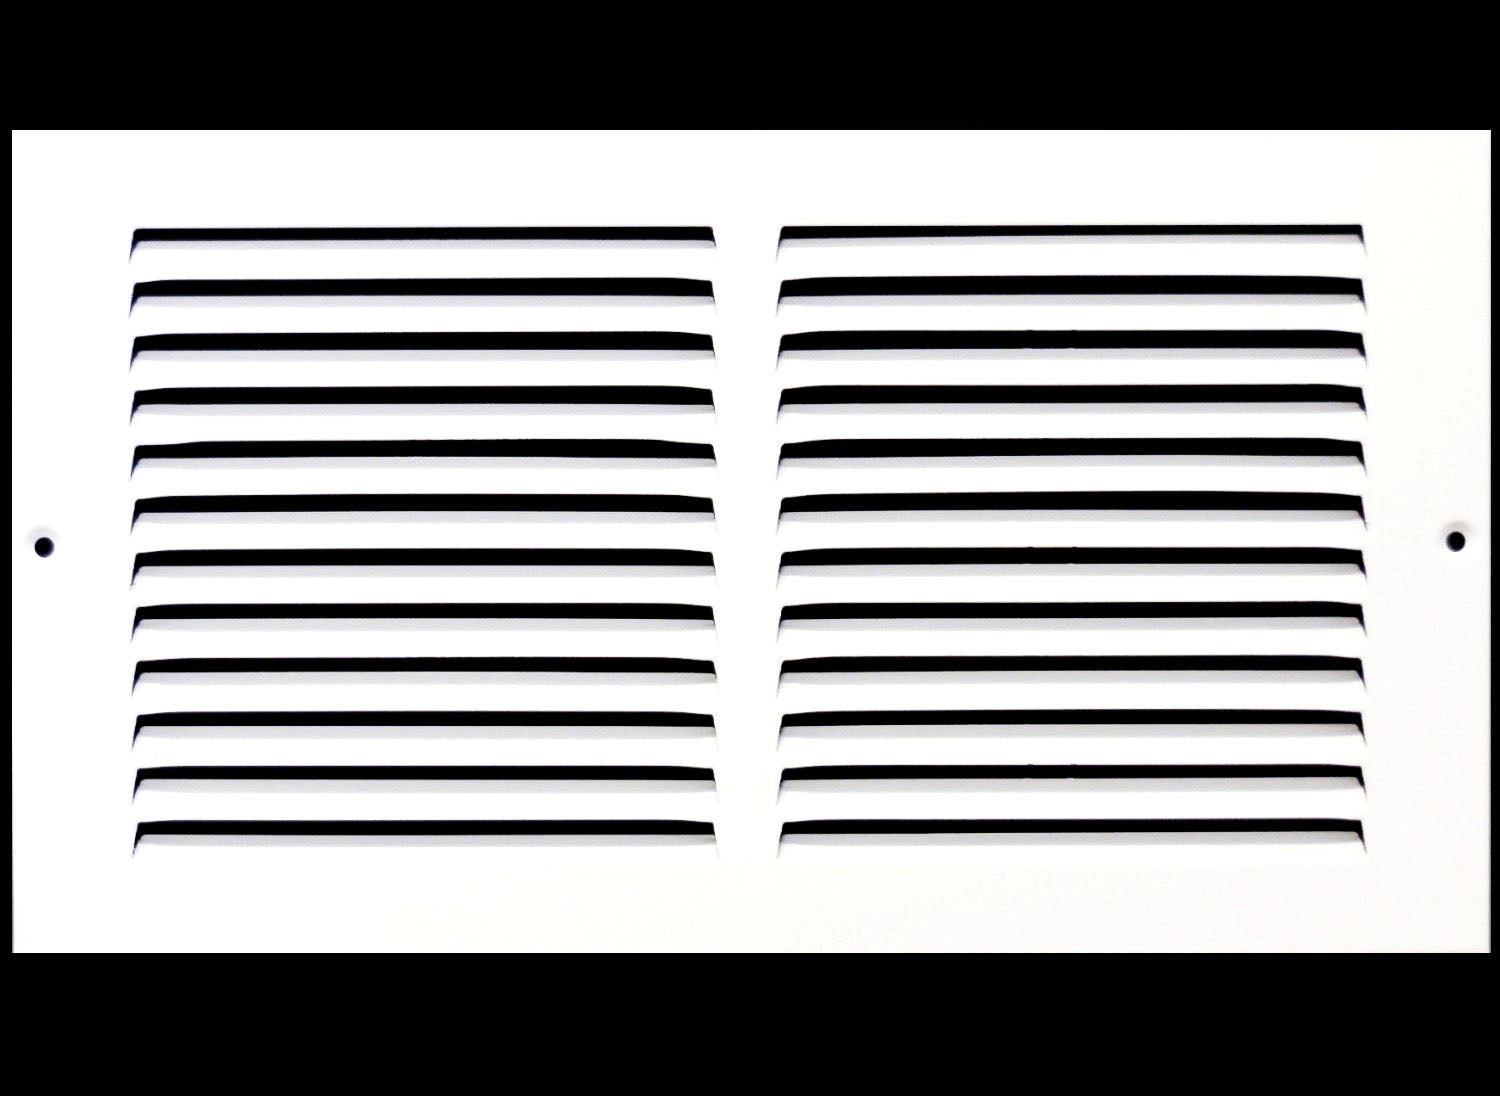 10" X 6" Air Vent Return Grilles - Sidewall and Ceiling - Steel